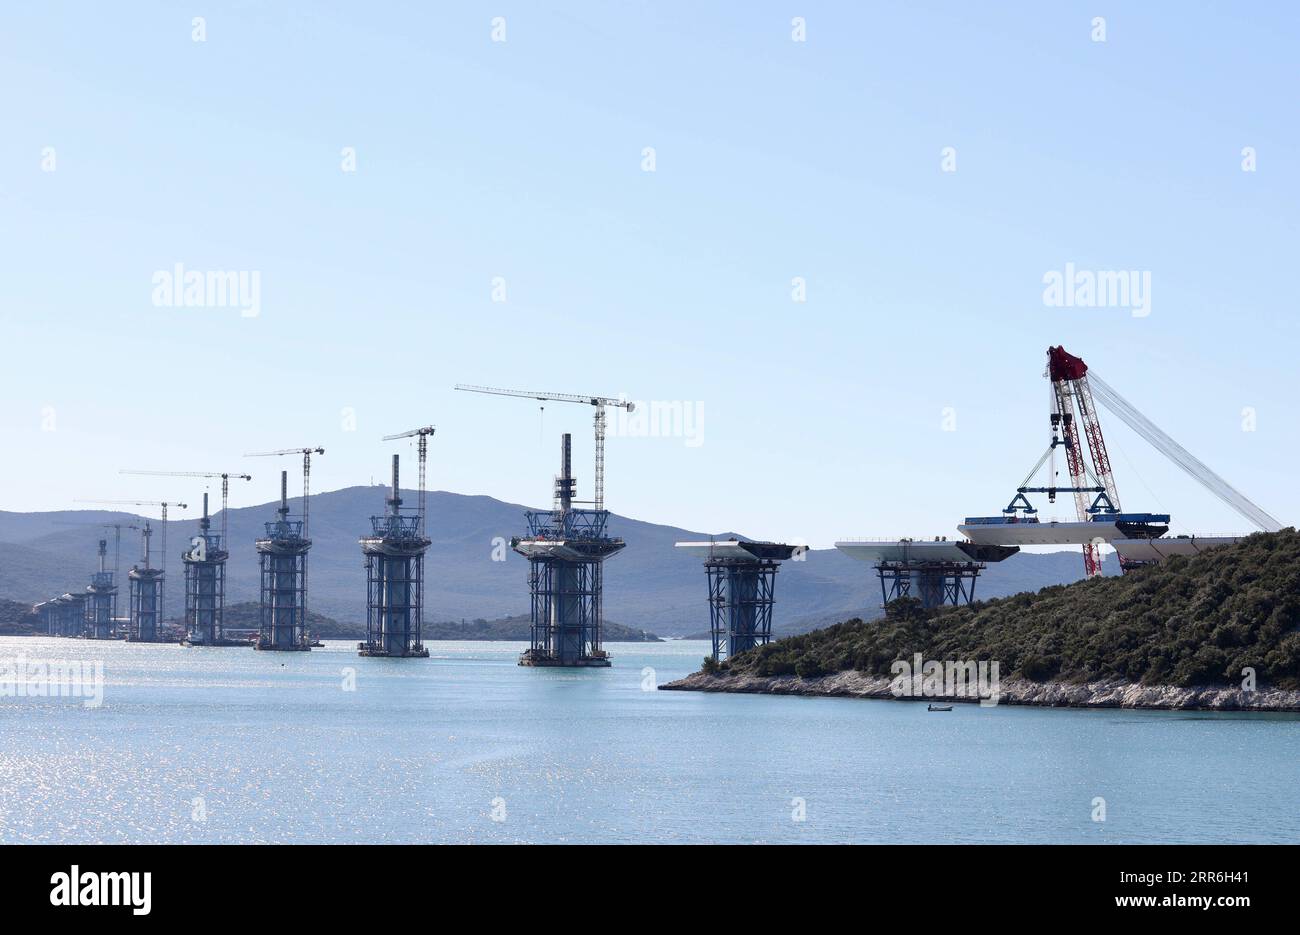 210215 -- KOMARNA CROATIA, Feb. 15, 2021 -- A crane carries a steel box girder to connect the Croatian mainland with the first sea-based pillar of the Peljesac Bridge near Komarna, Croatia, Feb. 15, 2021. The construction of the Peljesac Bridge, the biggest infrastructure project in Croatia, will be completed in June 2022, Prime Minister Andrej Plenkovic announced on Monday after visiting the site. The 2.4-kilometer-long Peljesac Bridge connects Croatia s southernmost Dubrovnik-Neretva County to the rest of the mainland, giving the southeastern European country a continuous land link that bypa Stock Photo